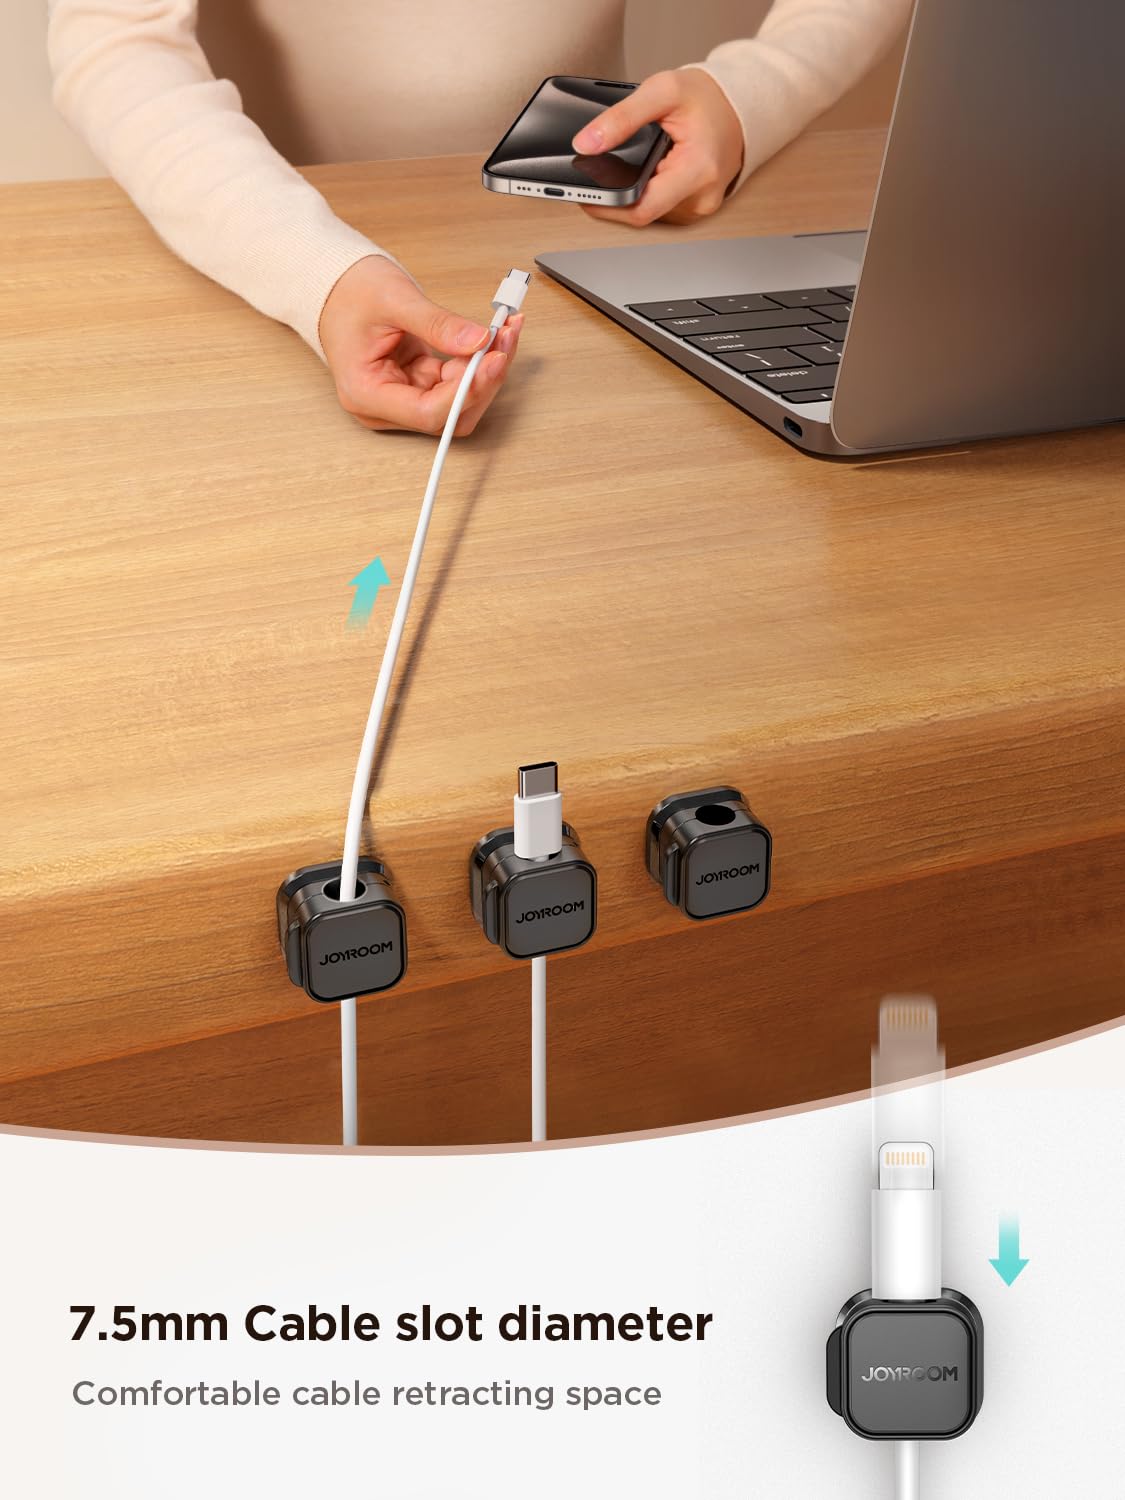 6 Pack Magnetic Cable Clips [Cable Smooth Adjustable] Cord Holder, Under Desk Cable Management, JOYROOM Adhesive Wire Holder Keeper Organizer for Home Office Desk Phone Car Wall Desktop Nightstand